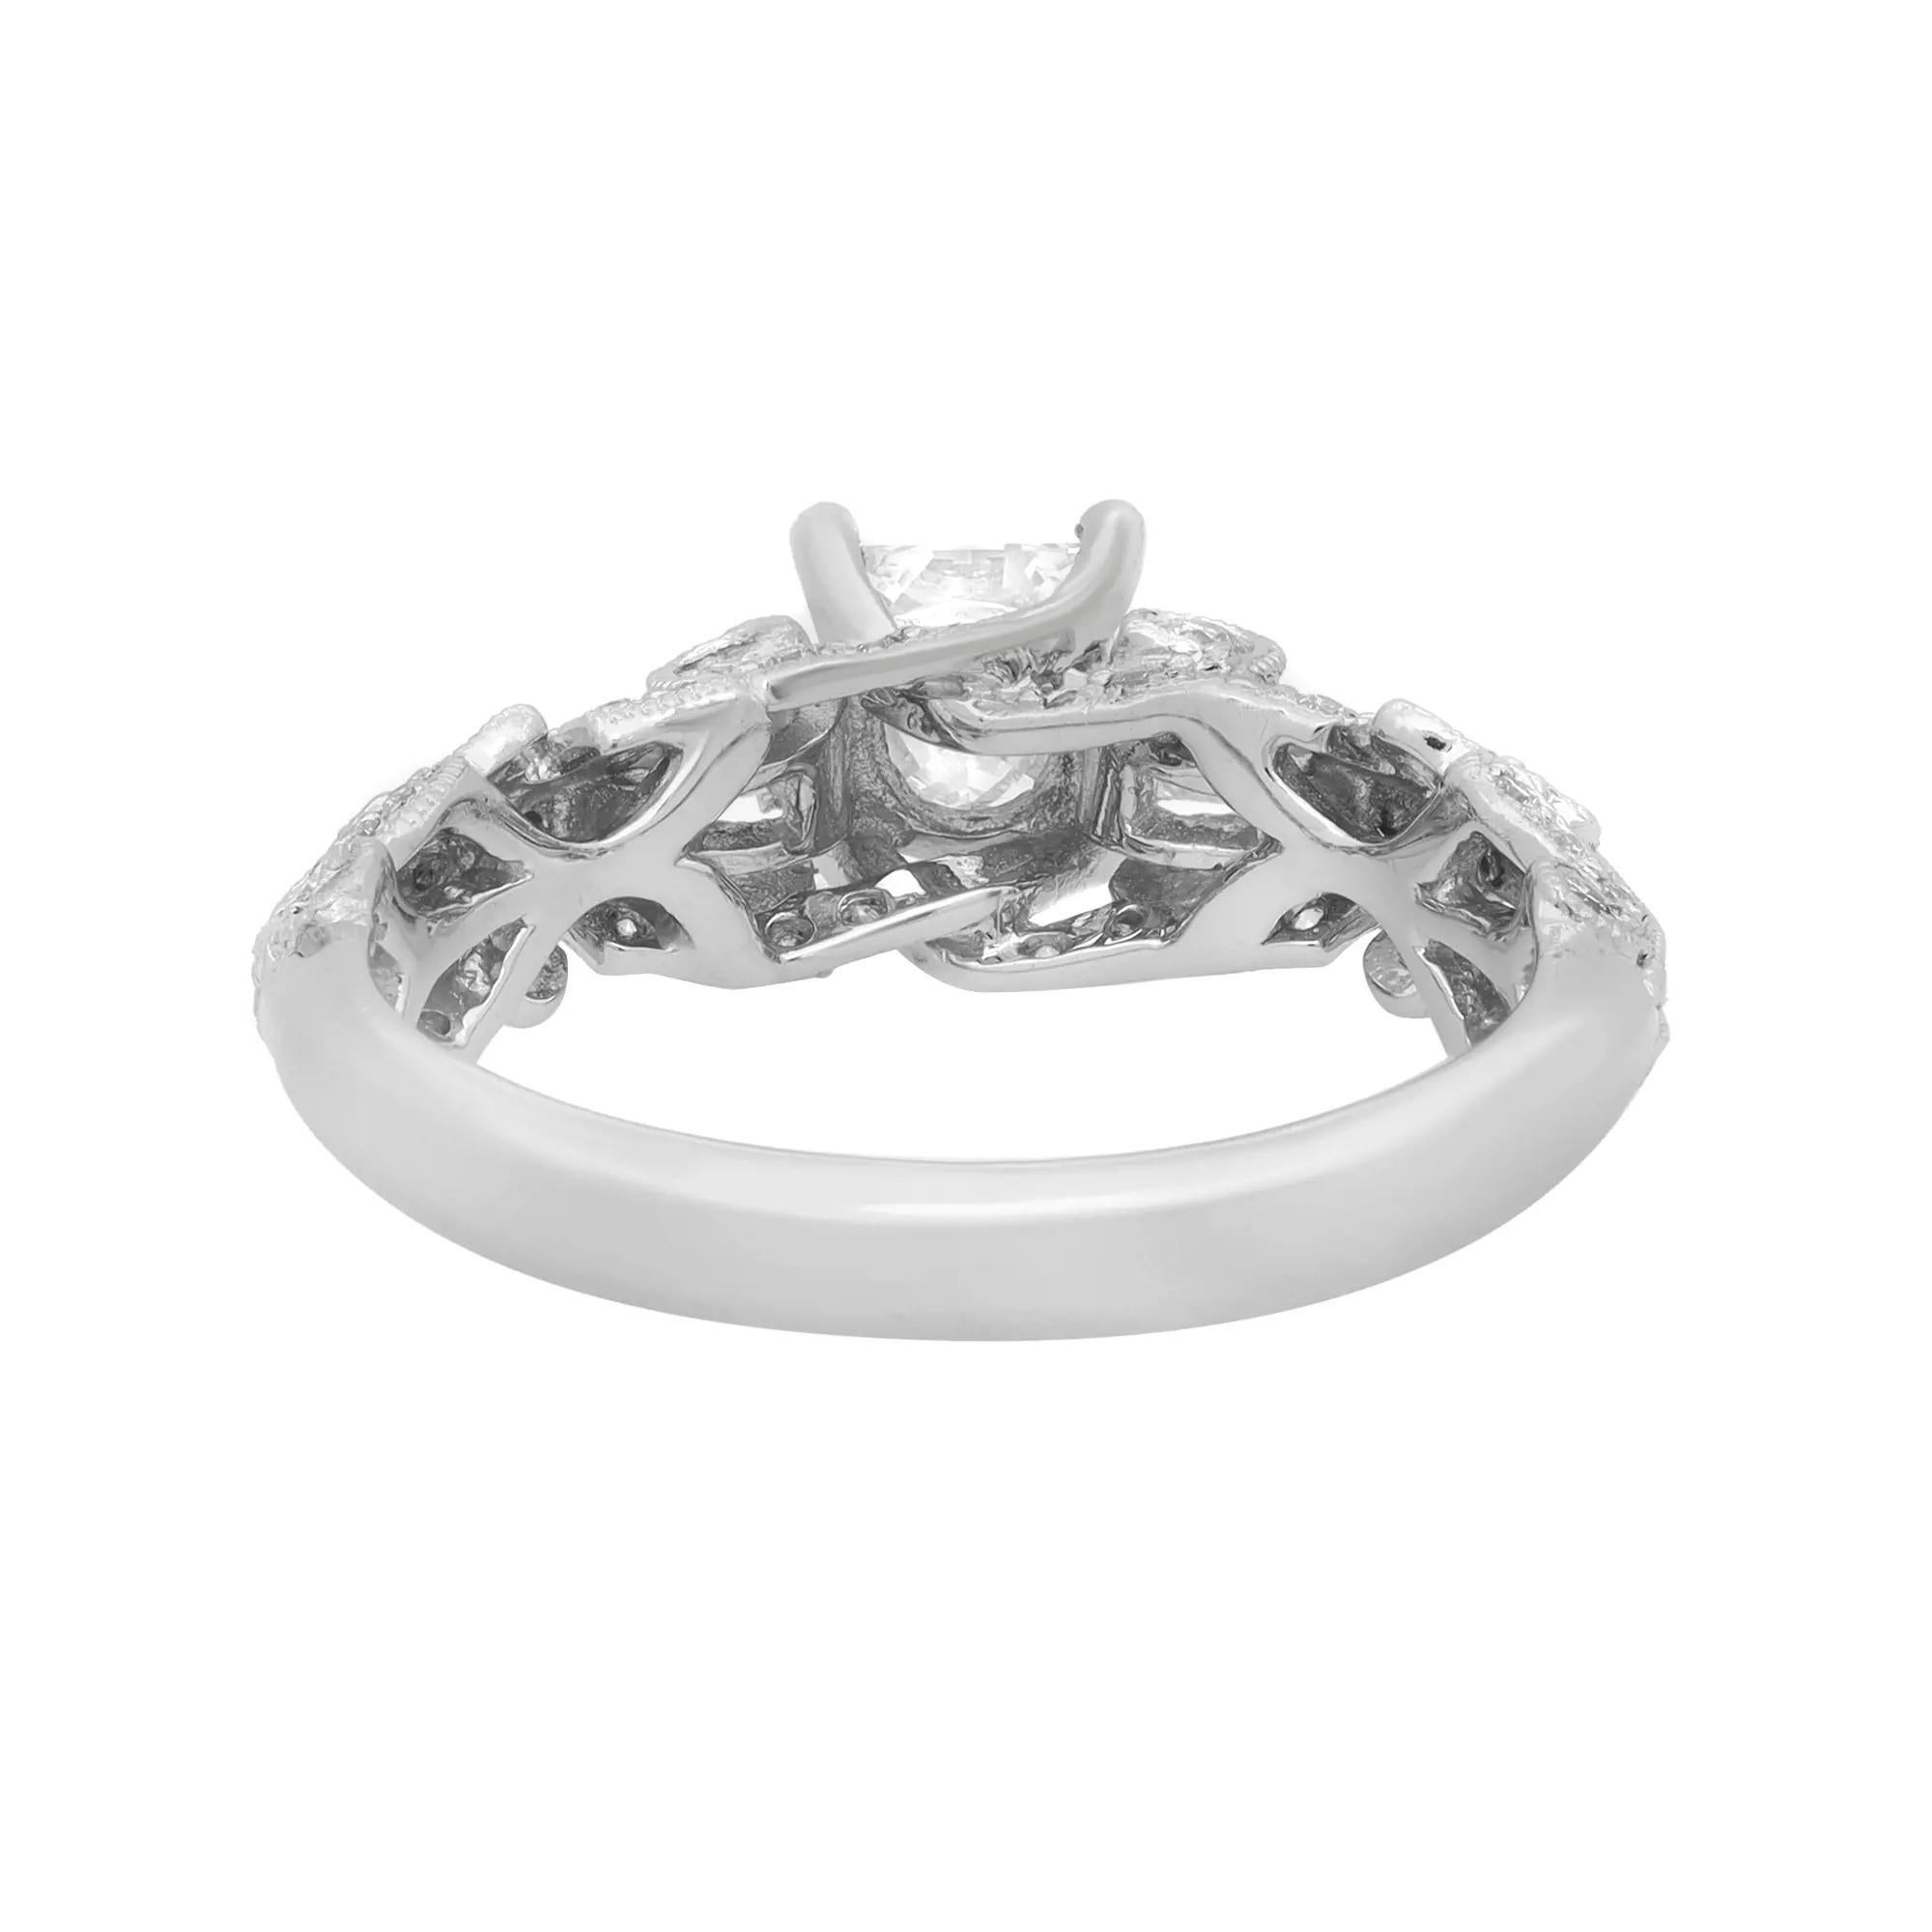 Truly a stunning treasure, this captivating princess cut diamond engagement ring is crafted in 18K white gold. It features a sparkling center princess cut diamond in a four-prong setting weighing 0.50 carat. Accenting the shine, glittering pave set